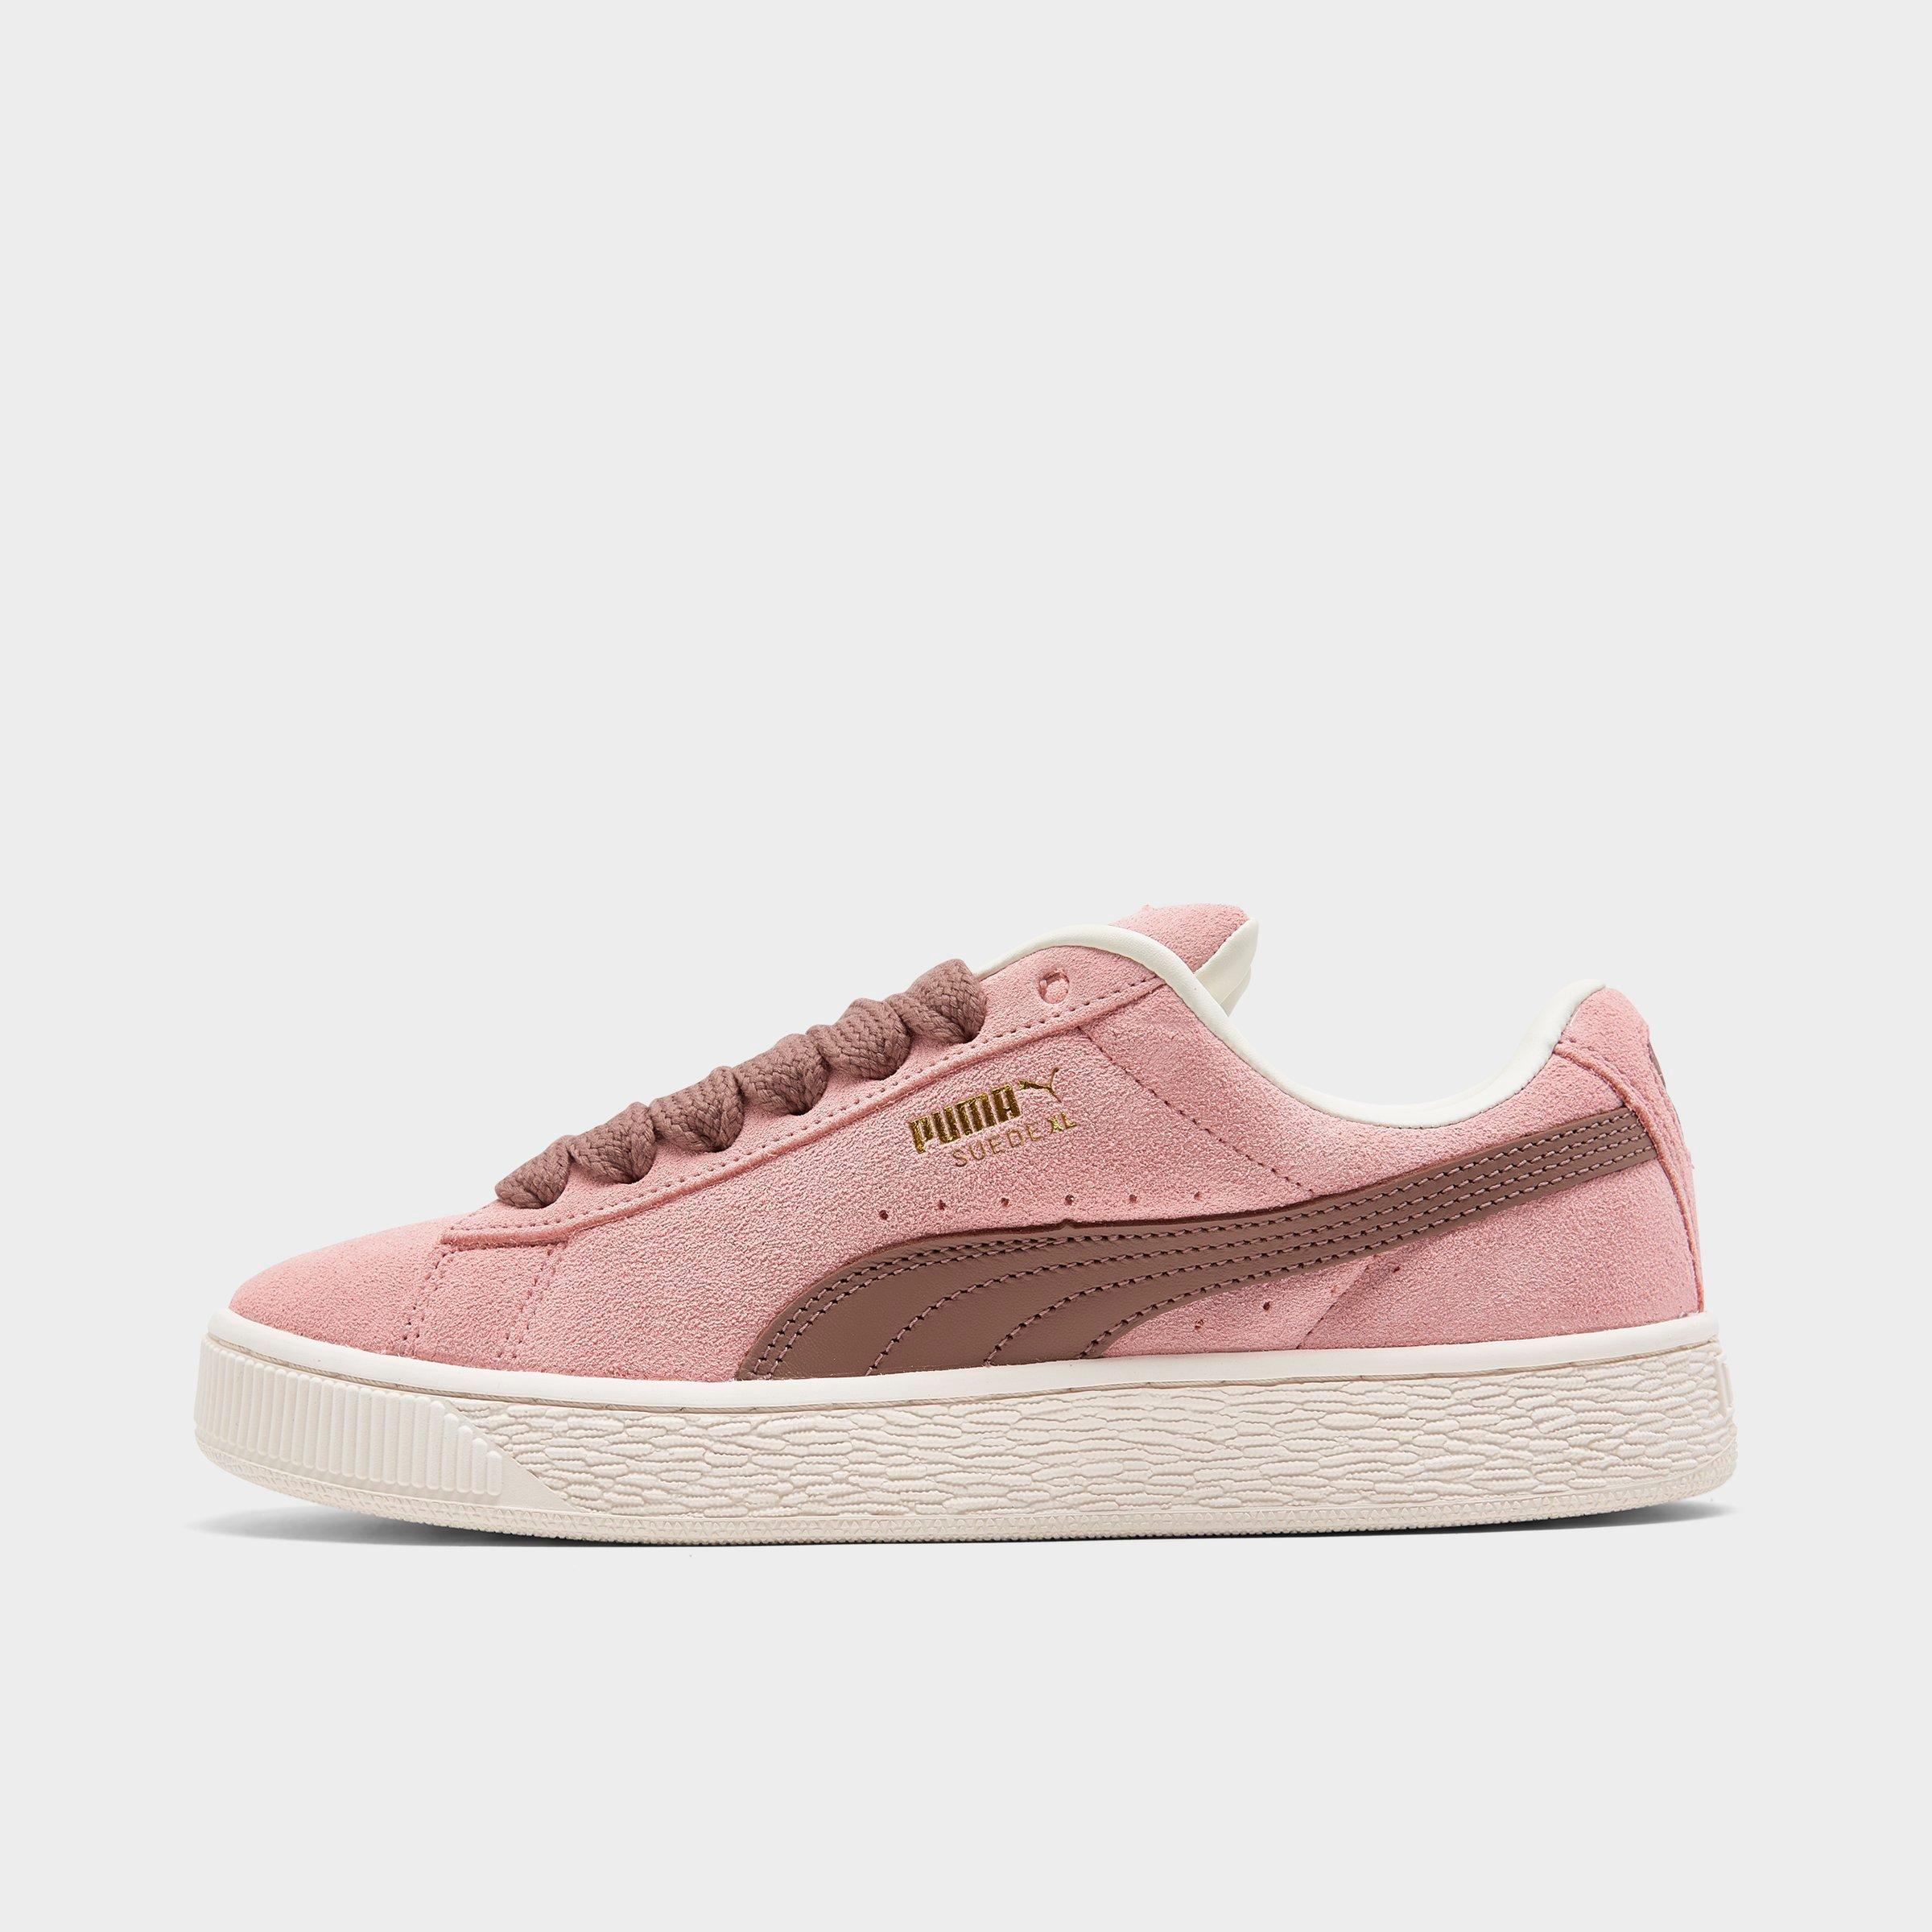 Shop Puma Women's Suede Xl Skate Casual Shoes In Pink/brown